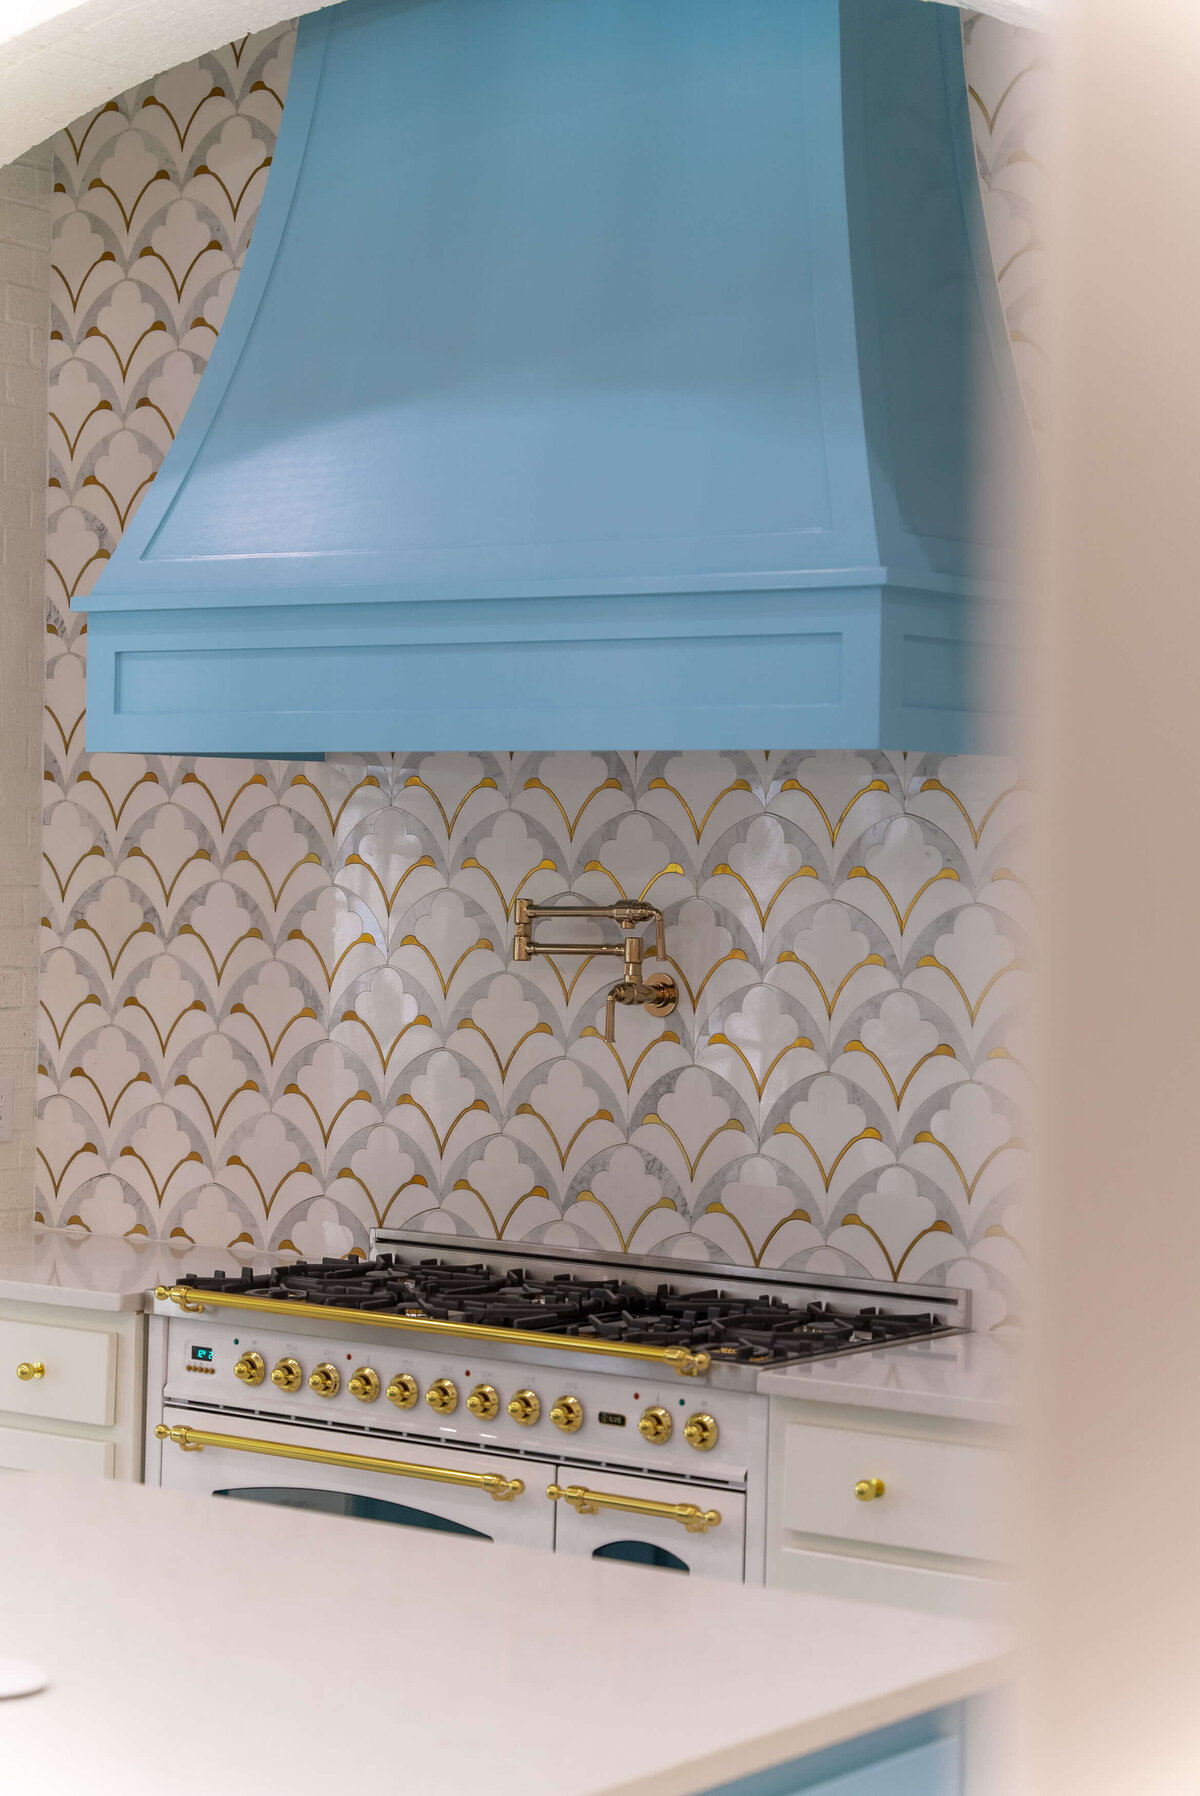 High-end colorful kitchen with bold patterns and gold accents